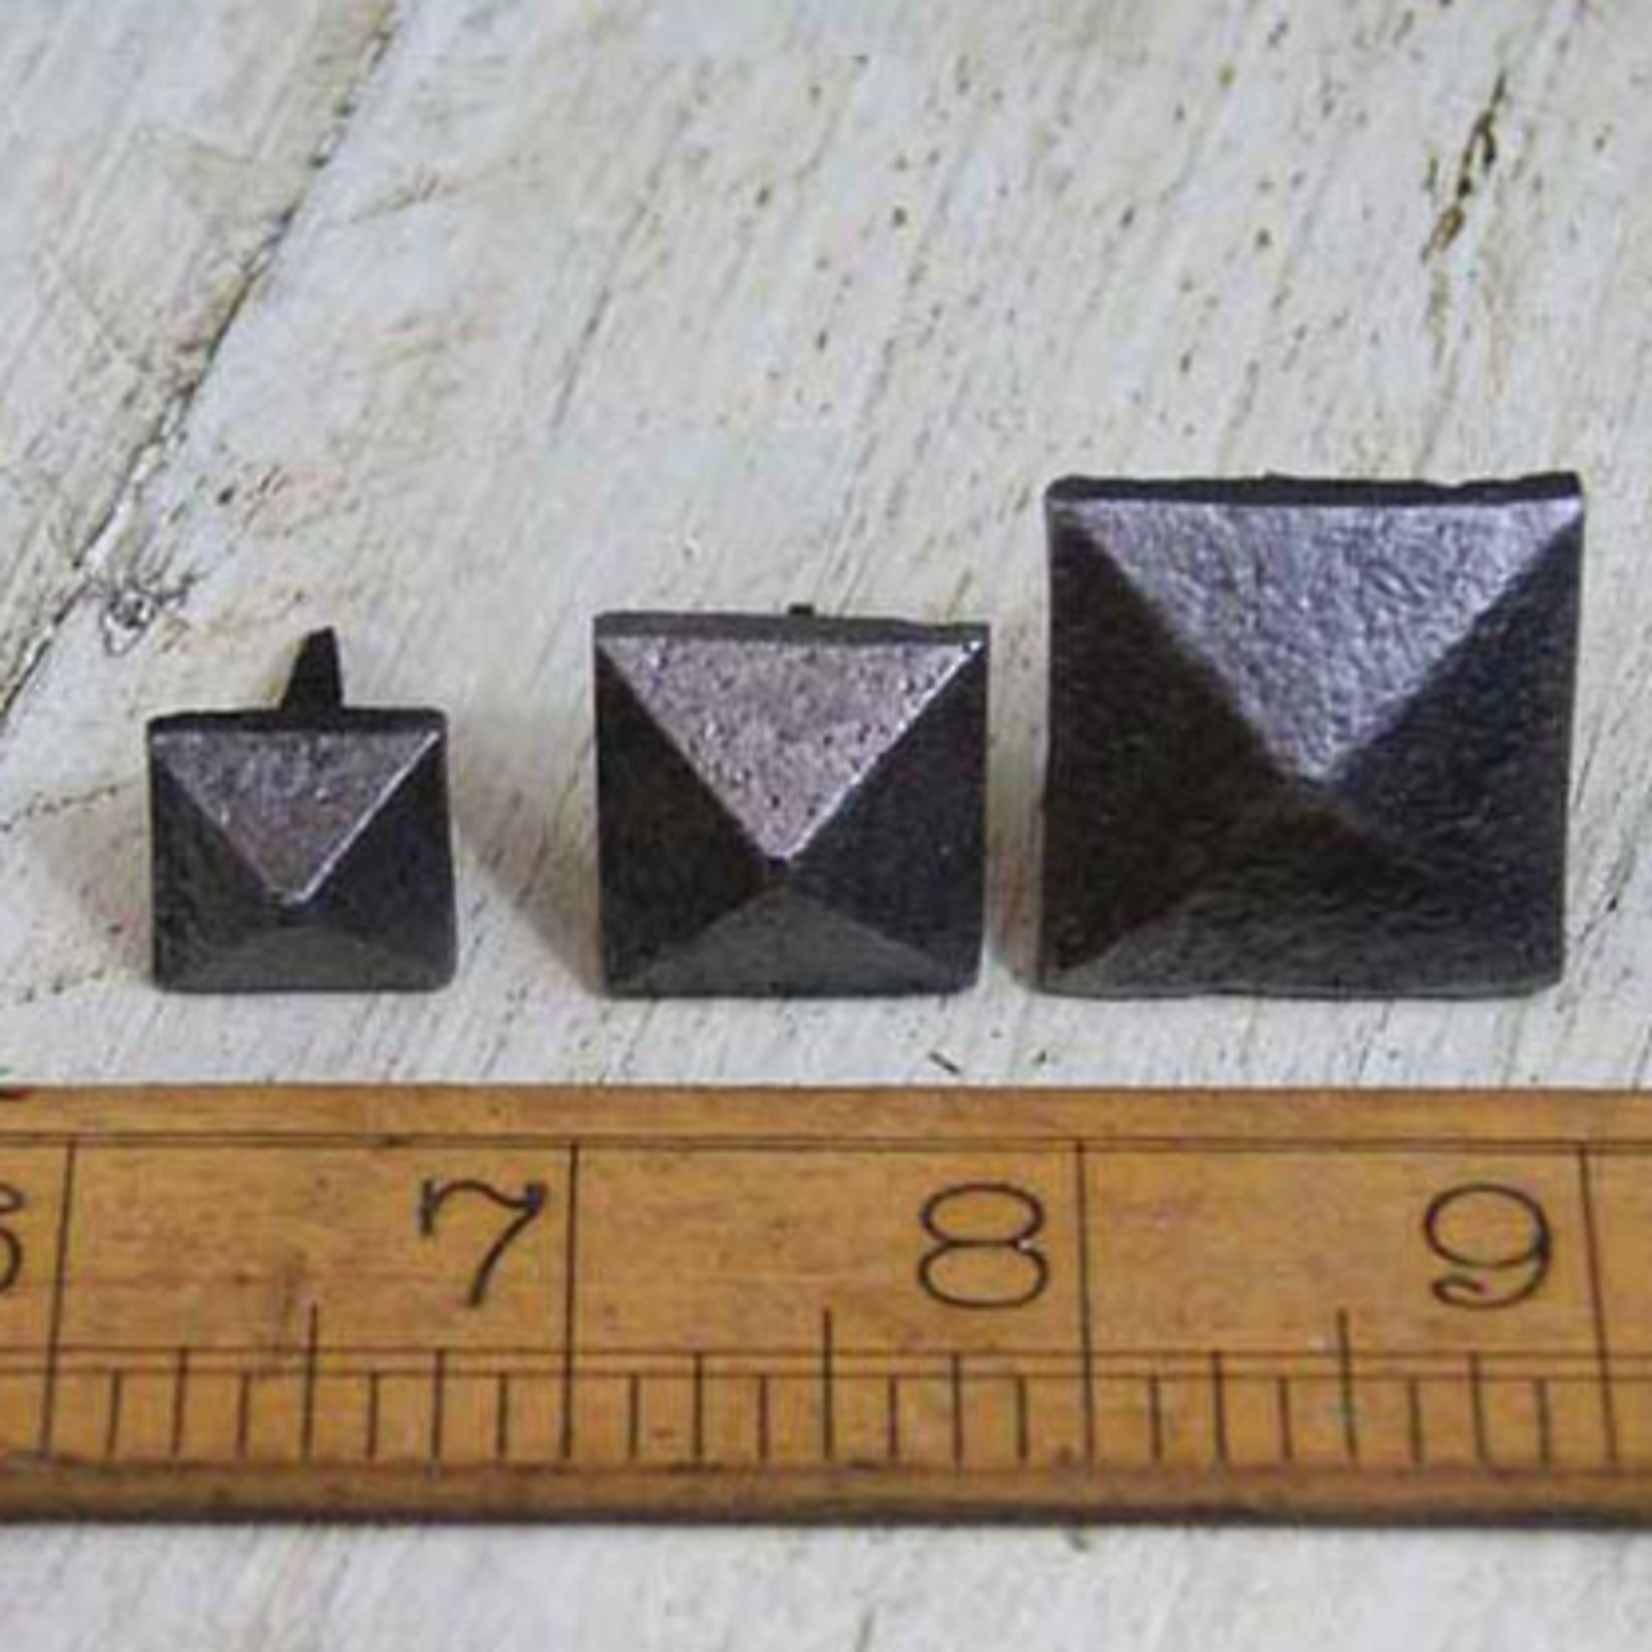 IRON RANGE Cast Iron Stud Square Pyramid Head 28mm Waxed Iron - used as a decorative door or wall stud